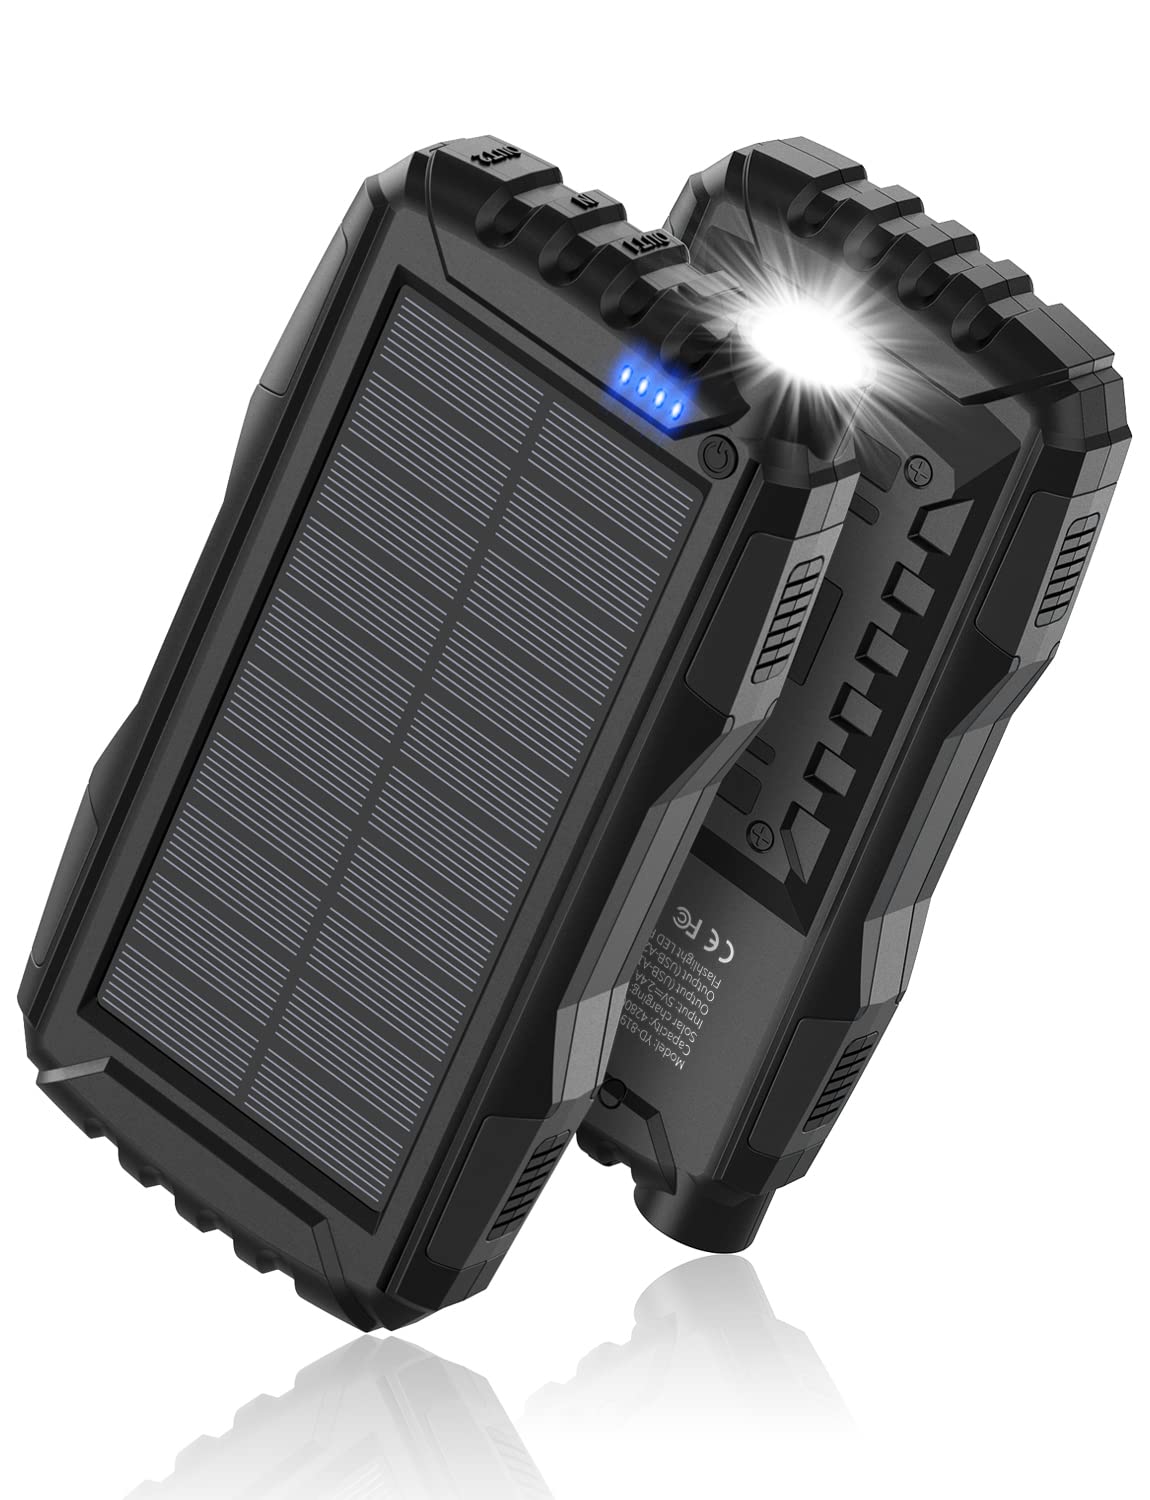 Best Solar Power Bank: Ultimate Guide for 2023